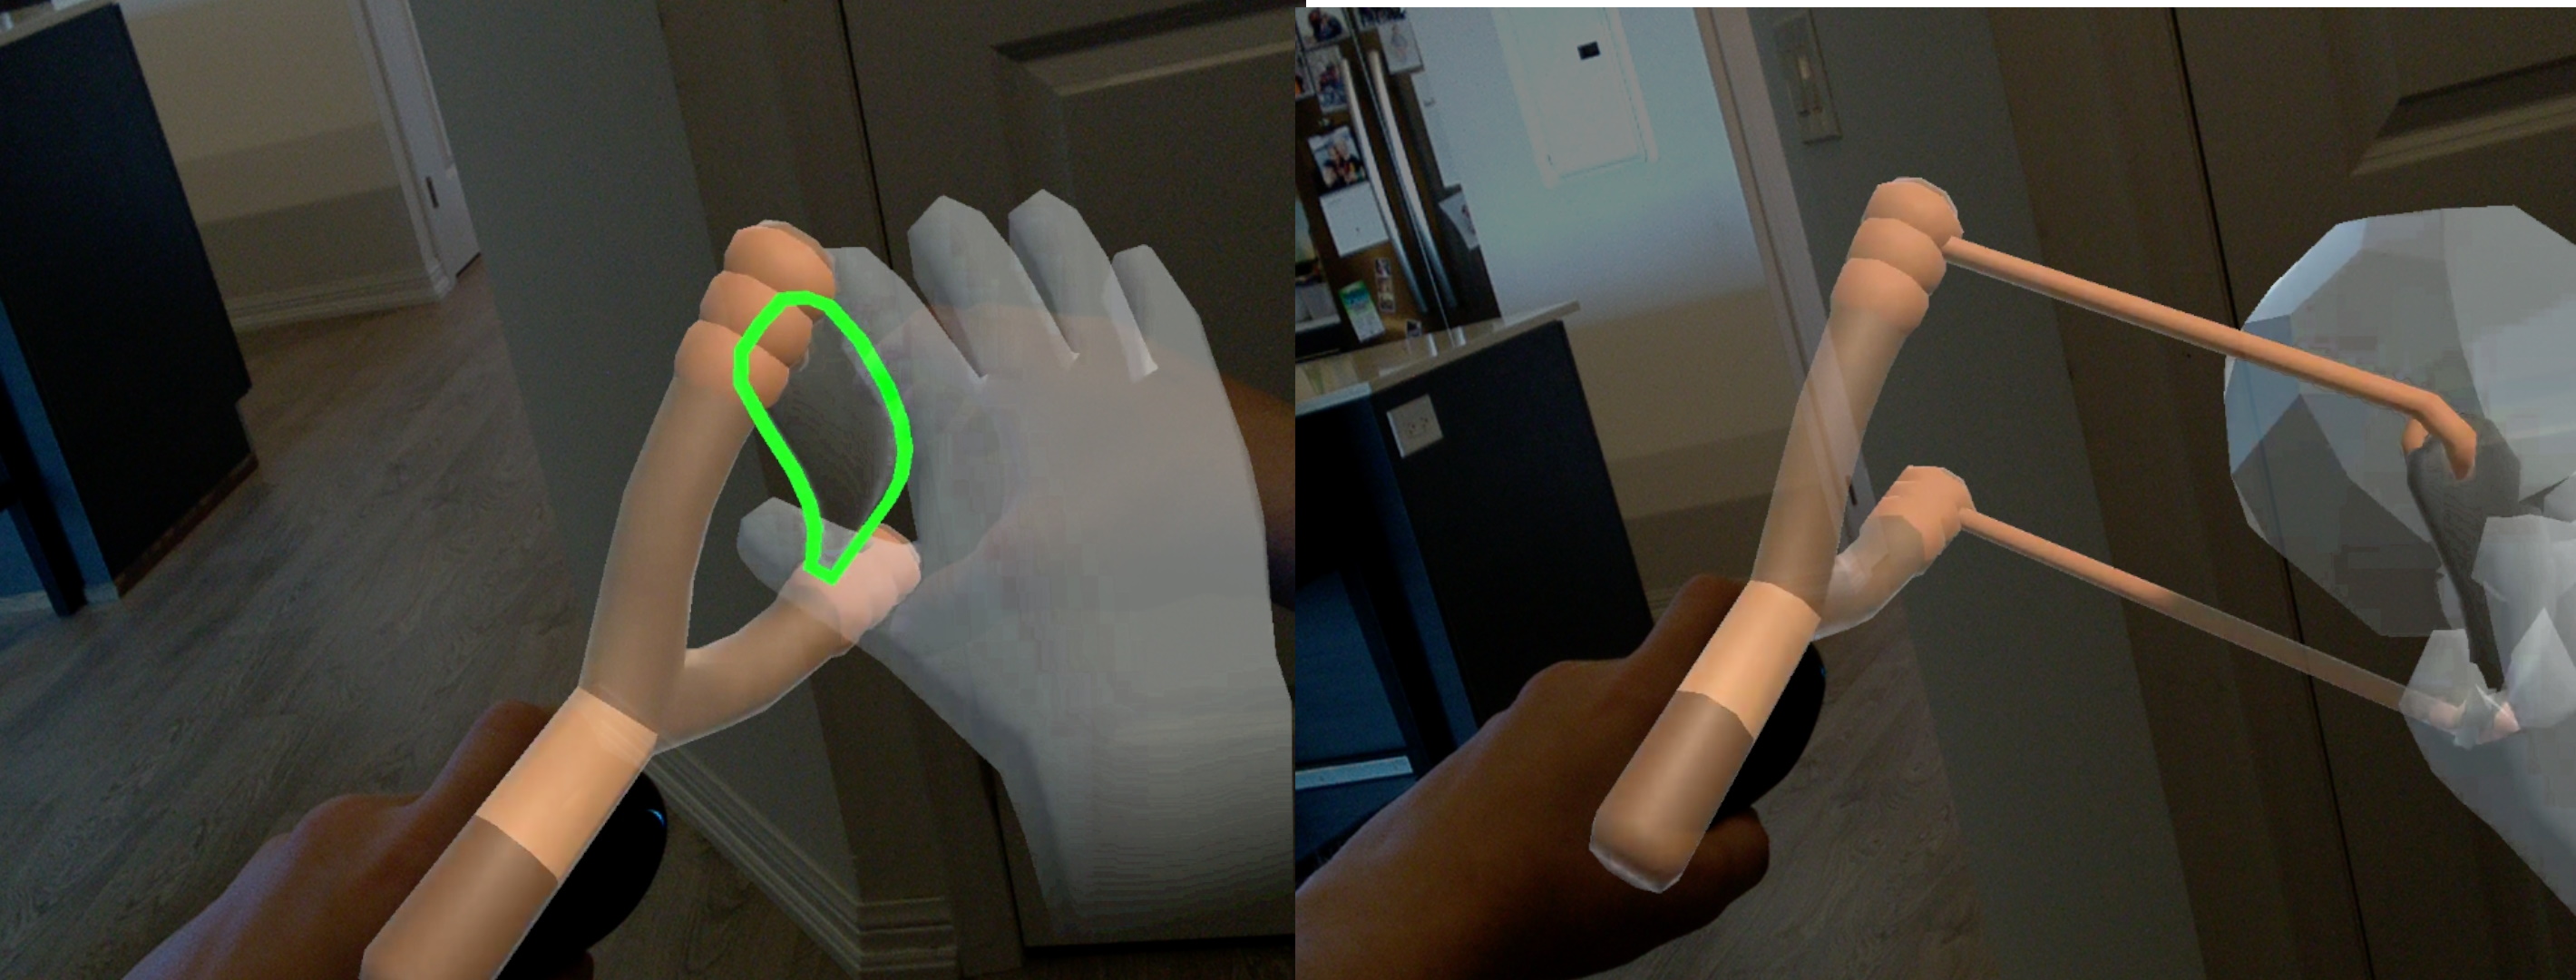 Hand tracking is used on the other hand if only one controller is used, to allow for grabbing Entities in play mode